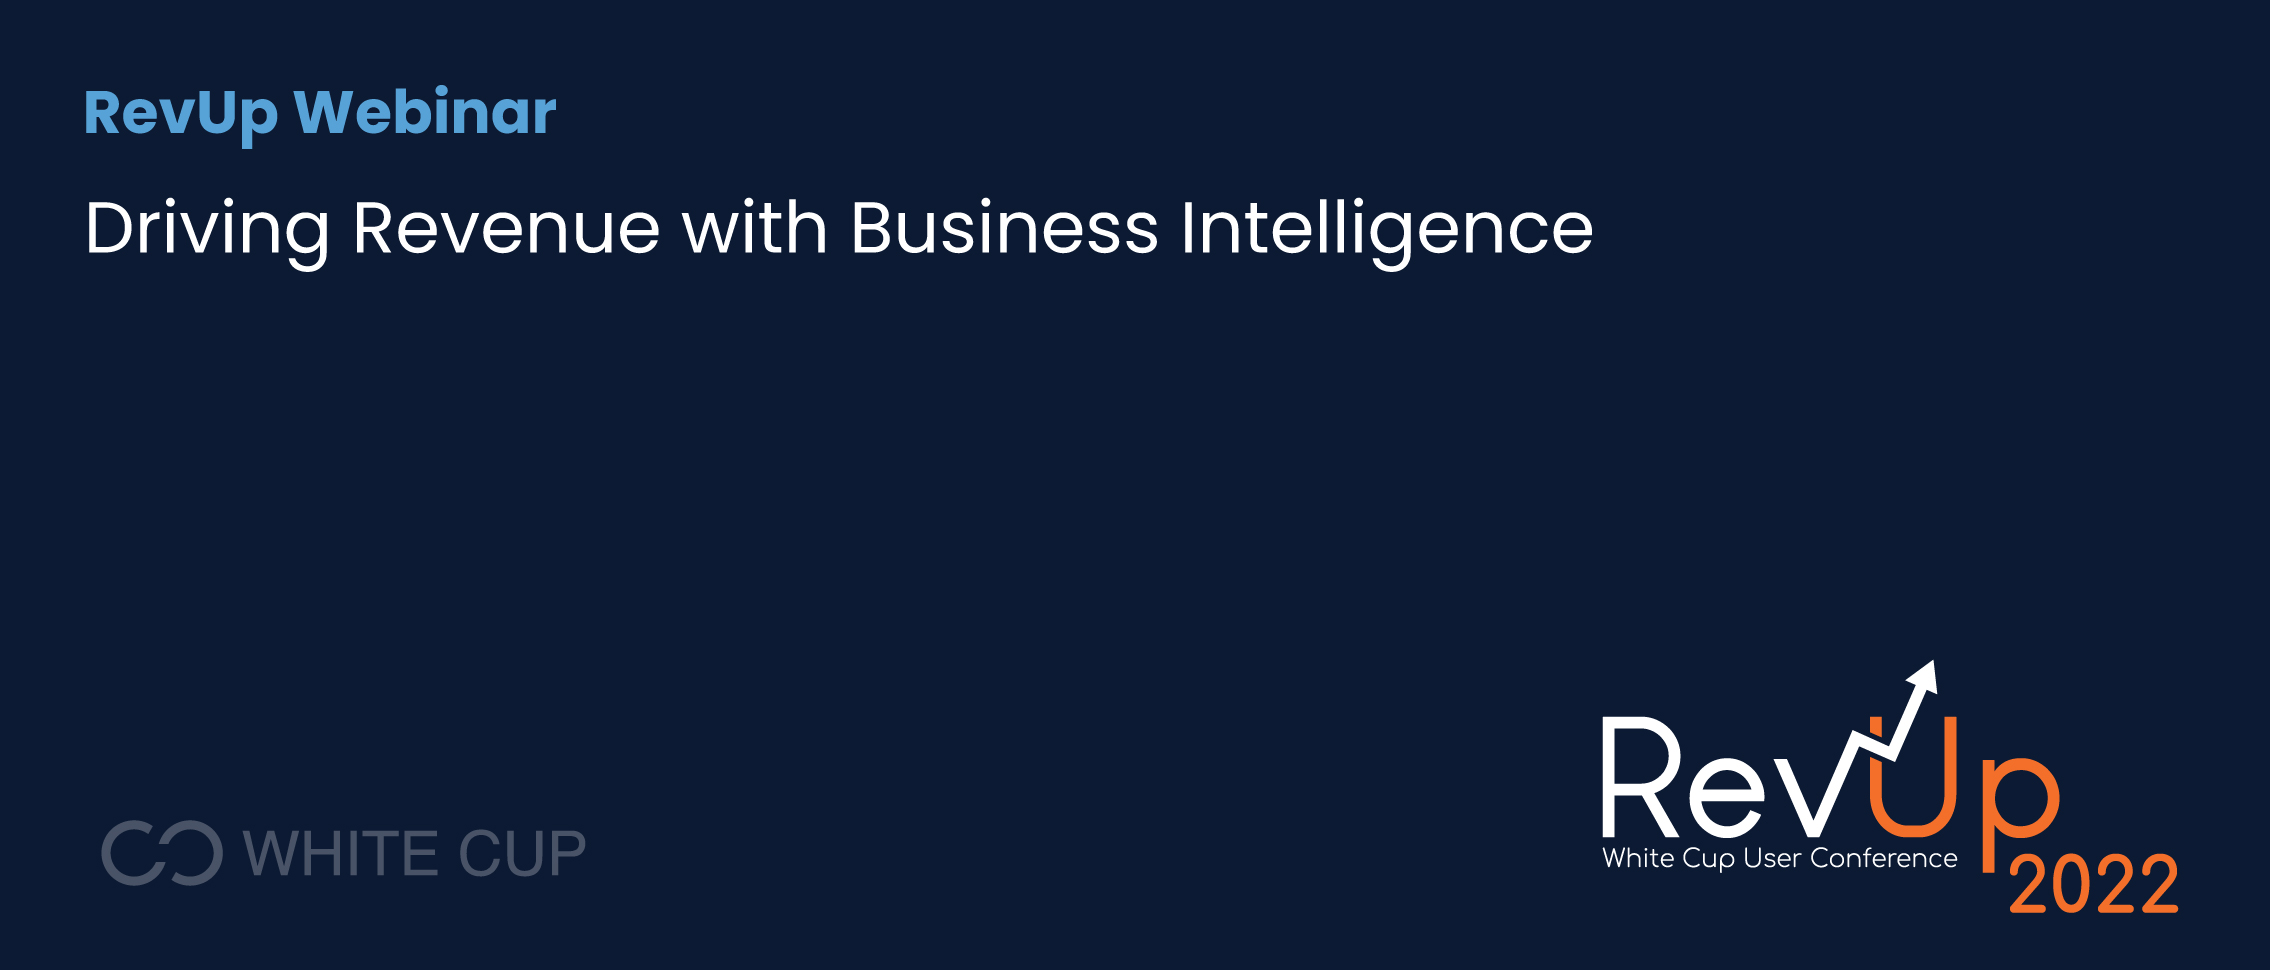 Driving Revenue with Business Intelligence Webinar